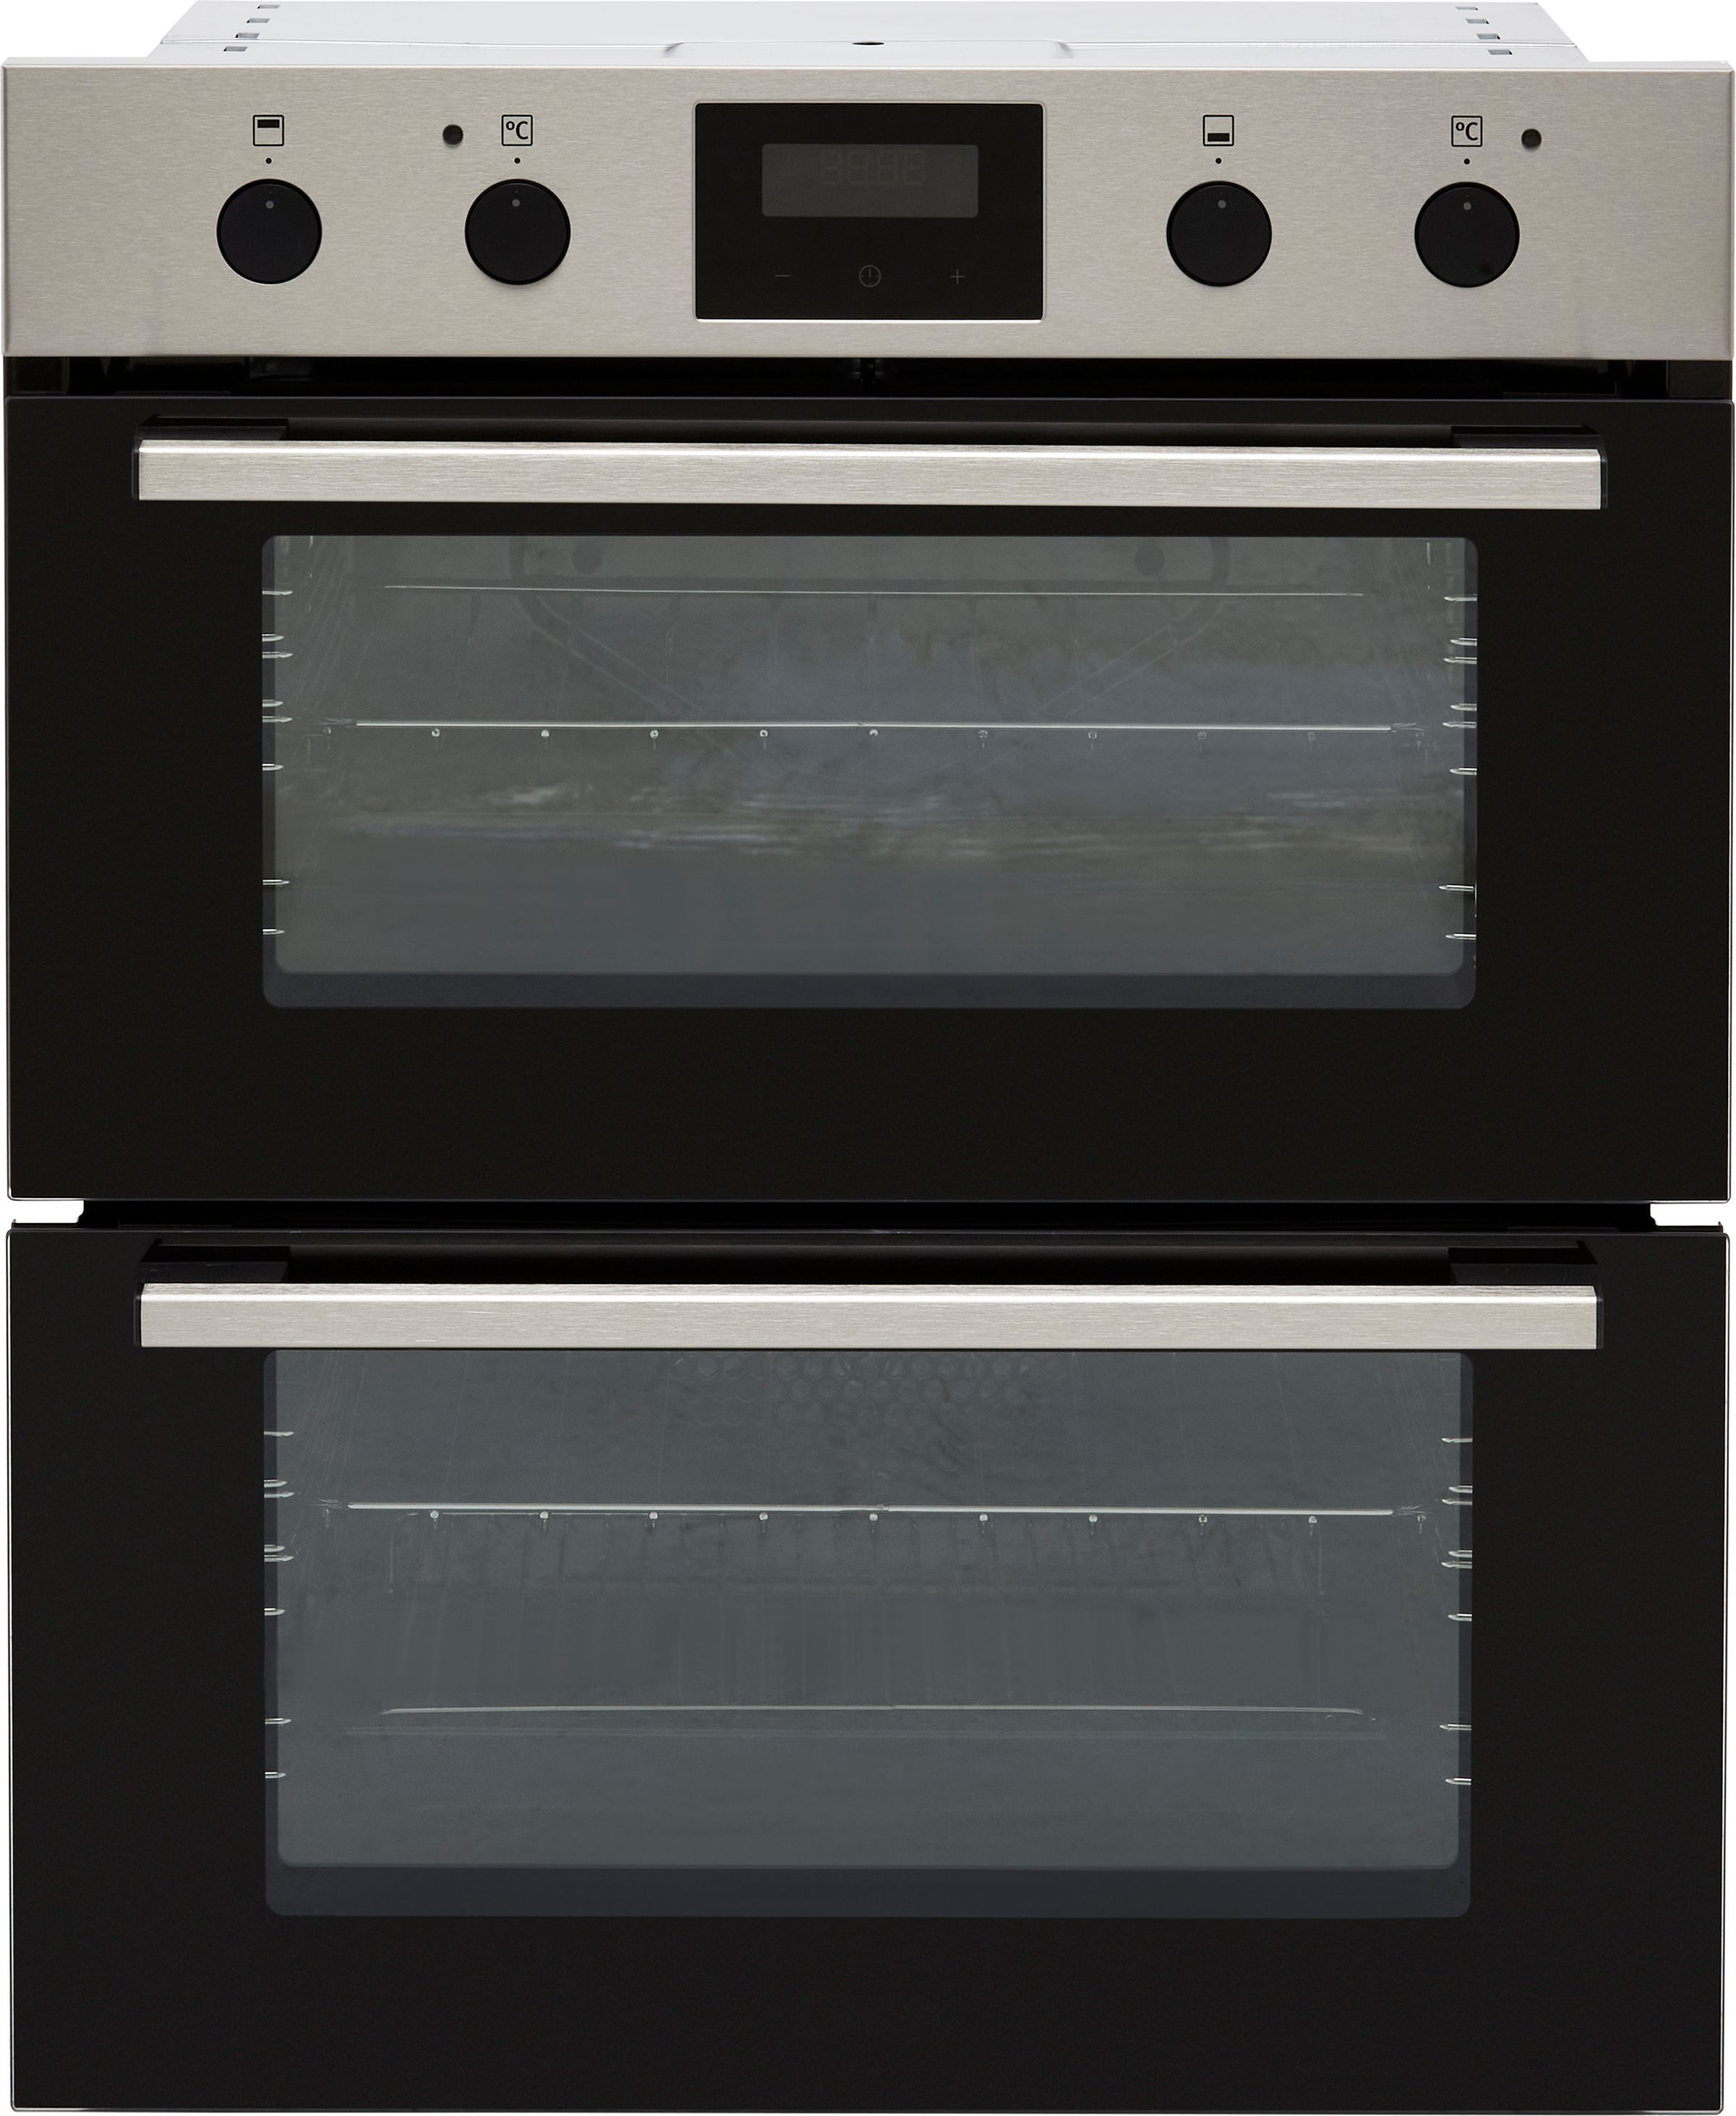 Zanussi ZPHNL3X1 Built Under Electric Double Oven - Stainless Steel - A/A Rated, Stainless Steel